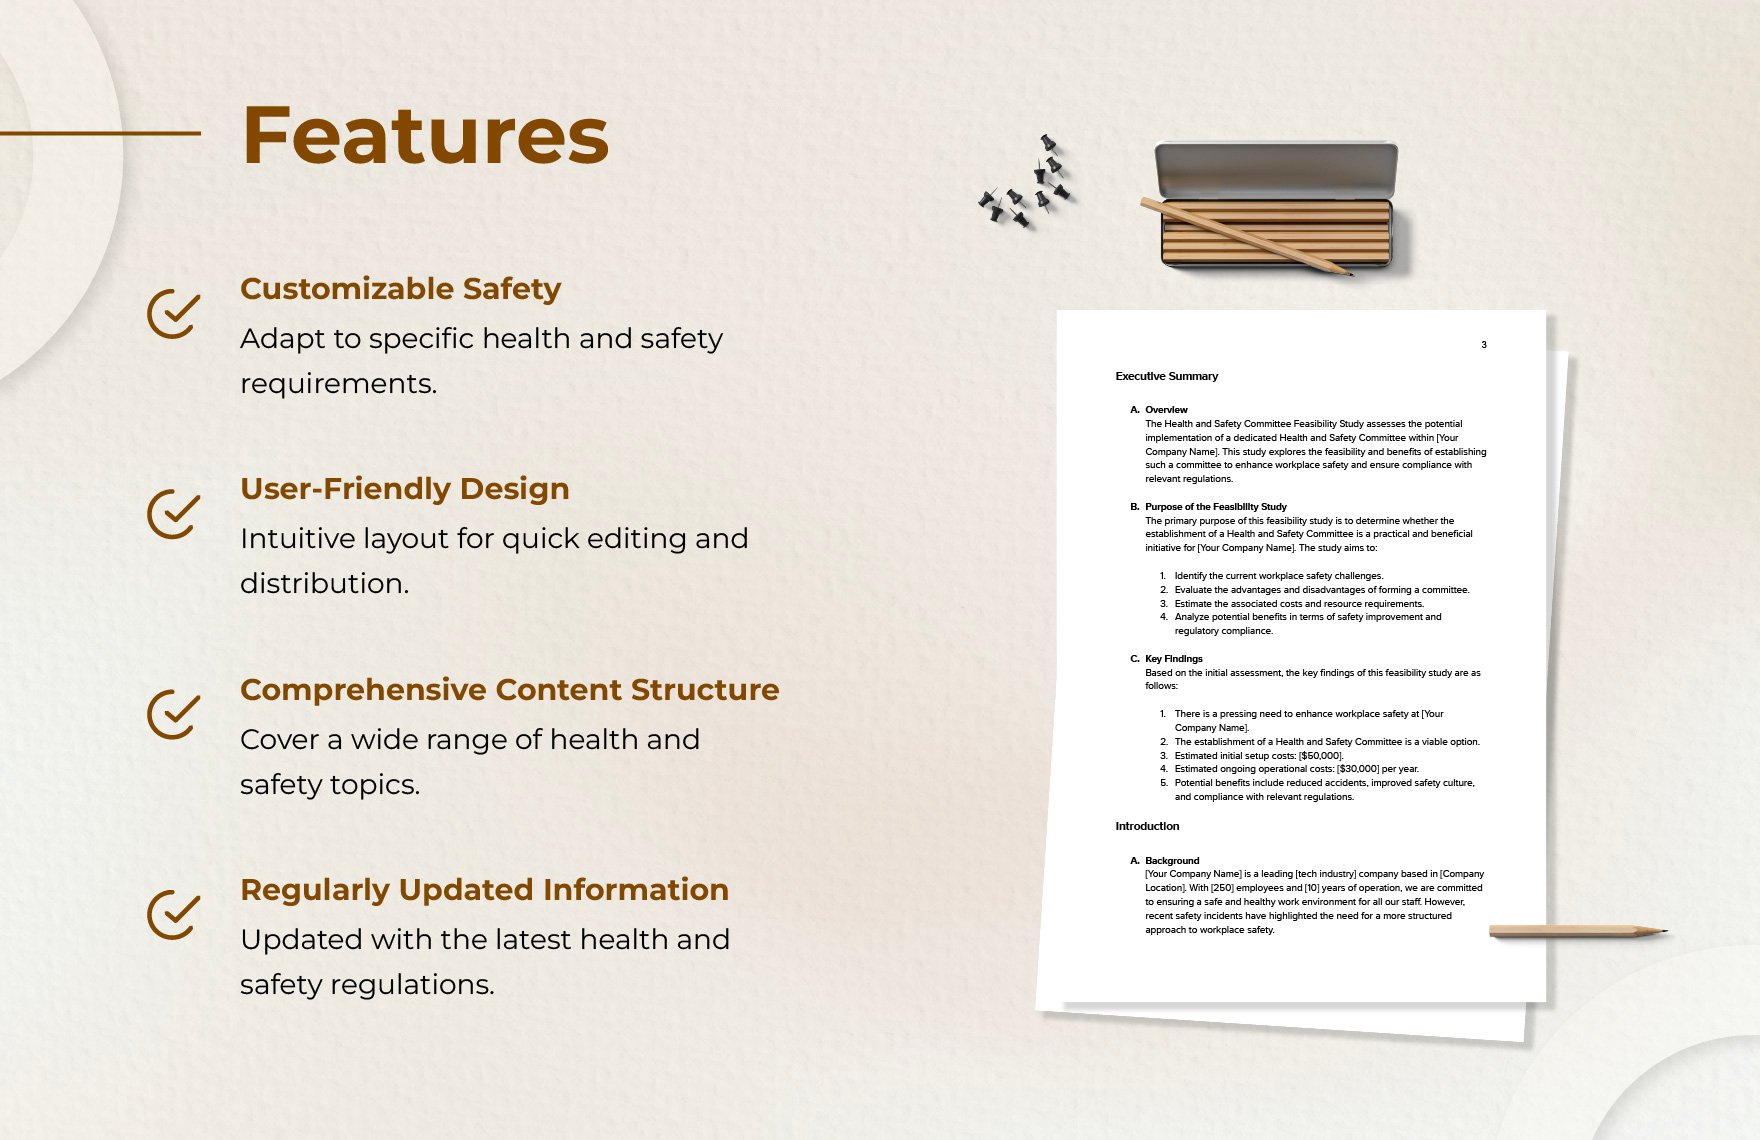 Health & Safety Committee Feasibility Study Template